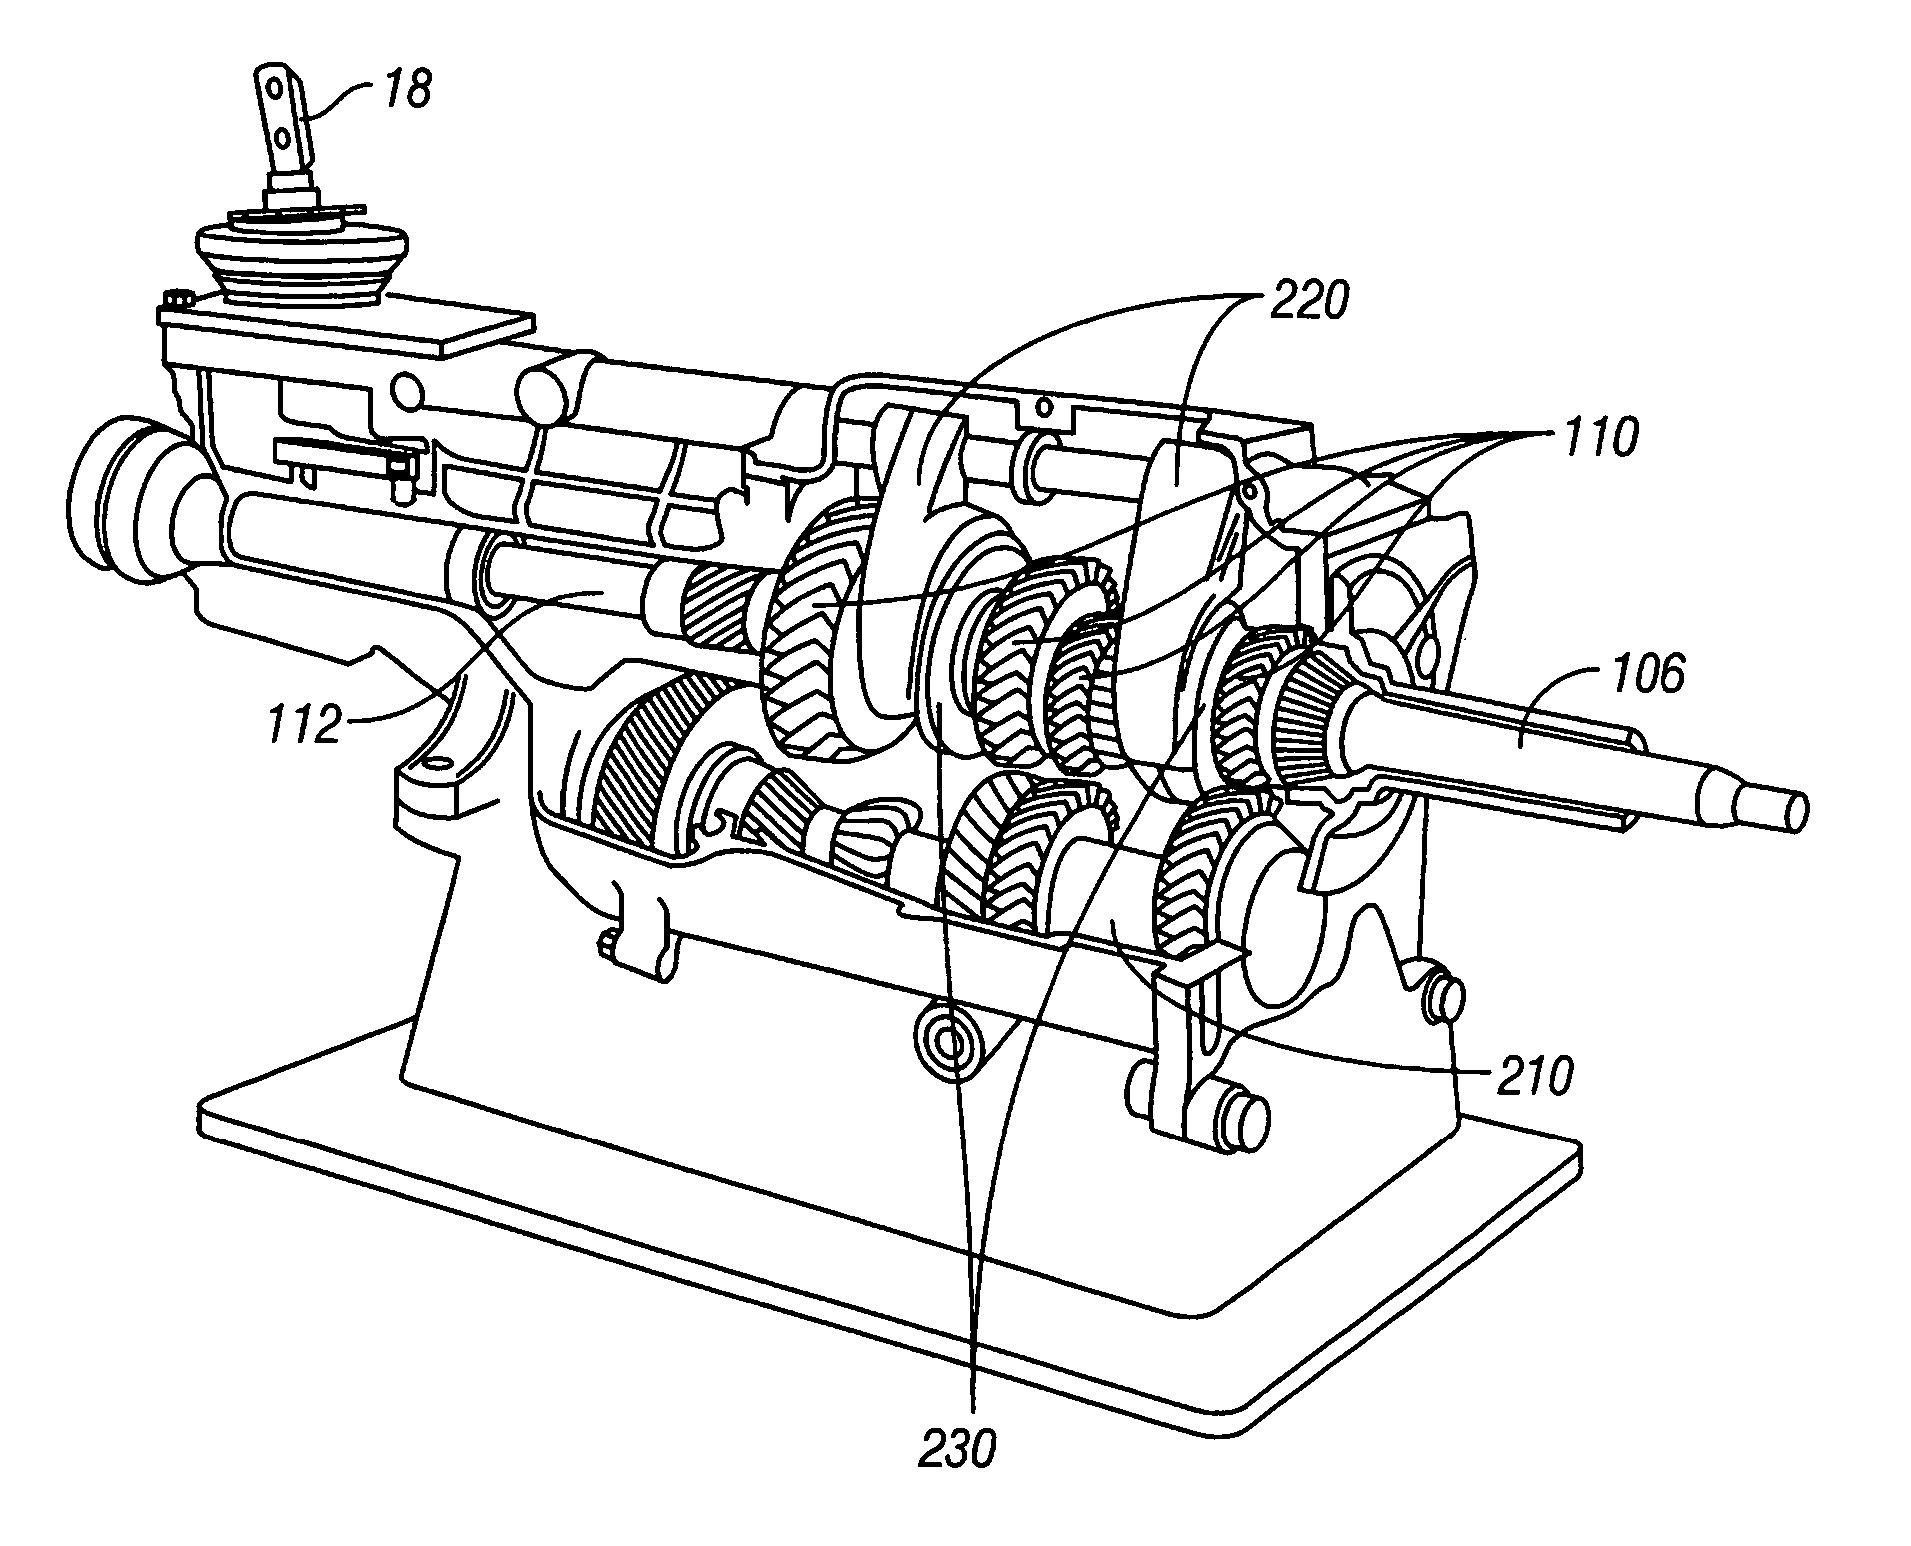 System for improving the refurbishing of a transmission